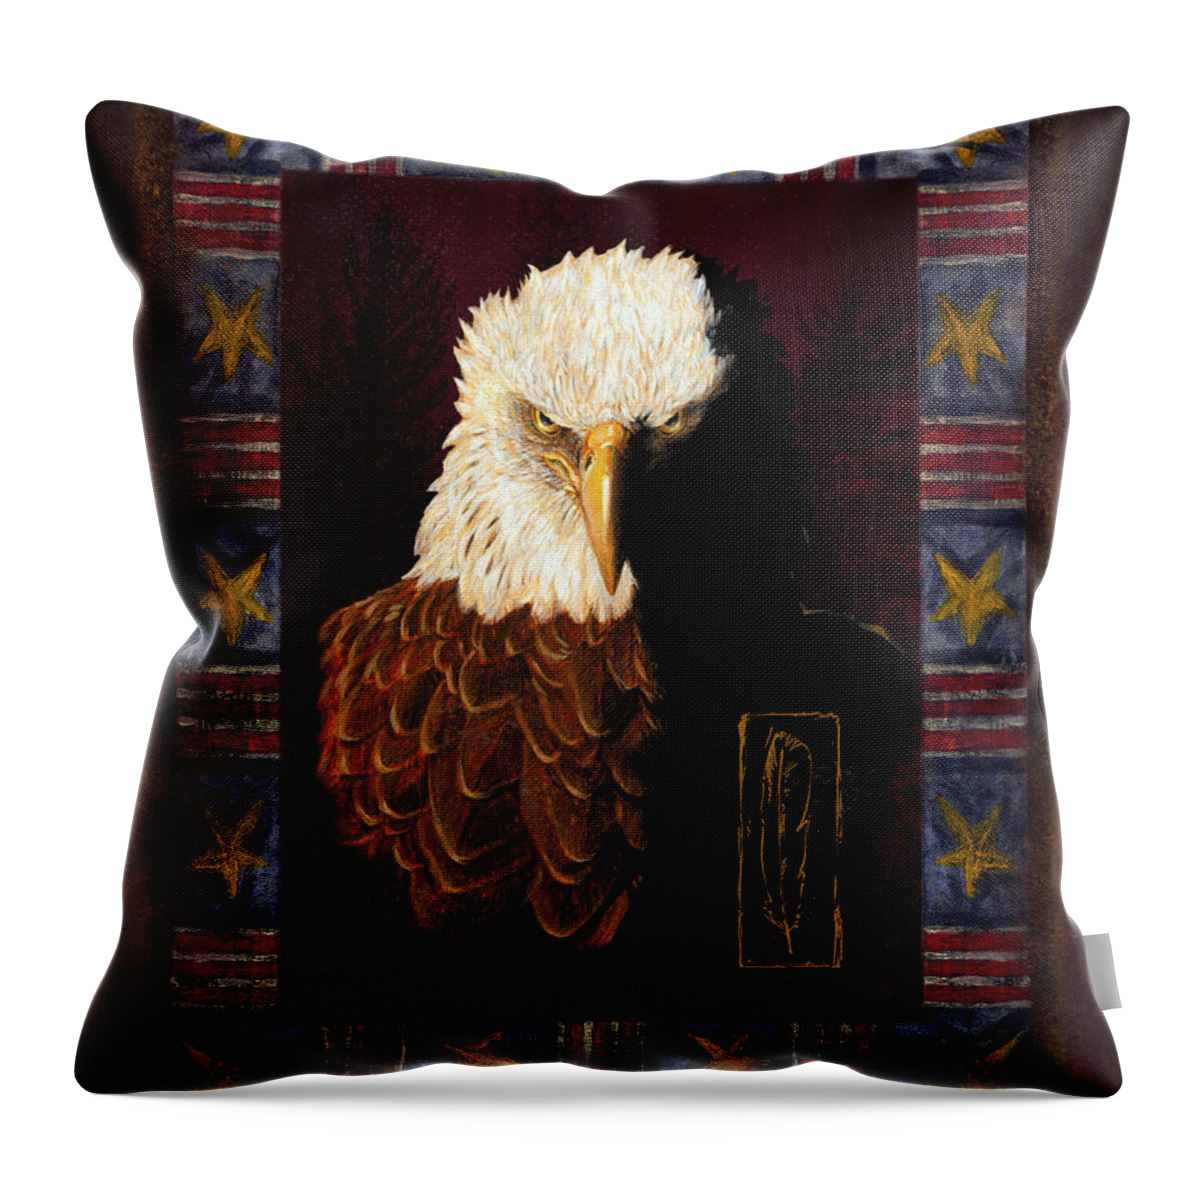 Wildlife Throw Pillow featuring the painting Shadow Eagle by JQ Licensing